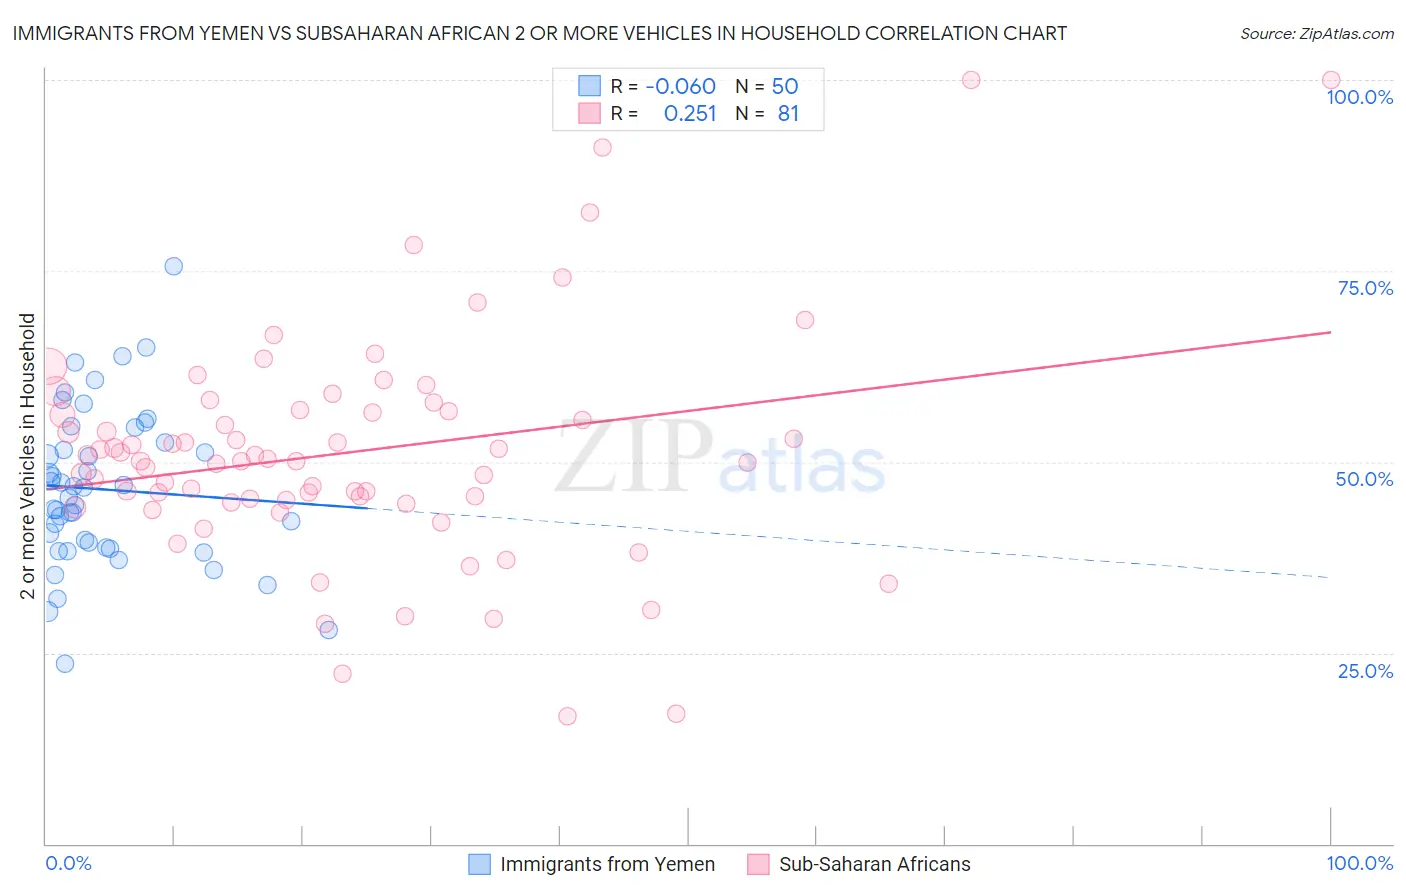 Immigrants from Yemen vs Subsaharan African 2 or more Vehicles in Household